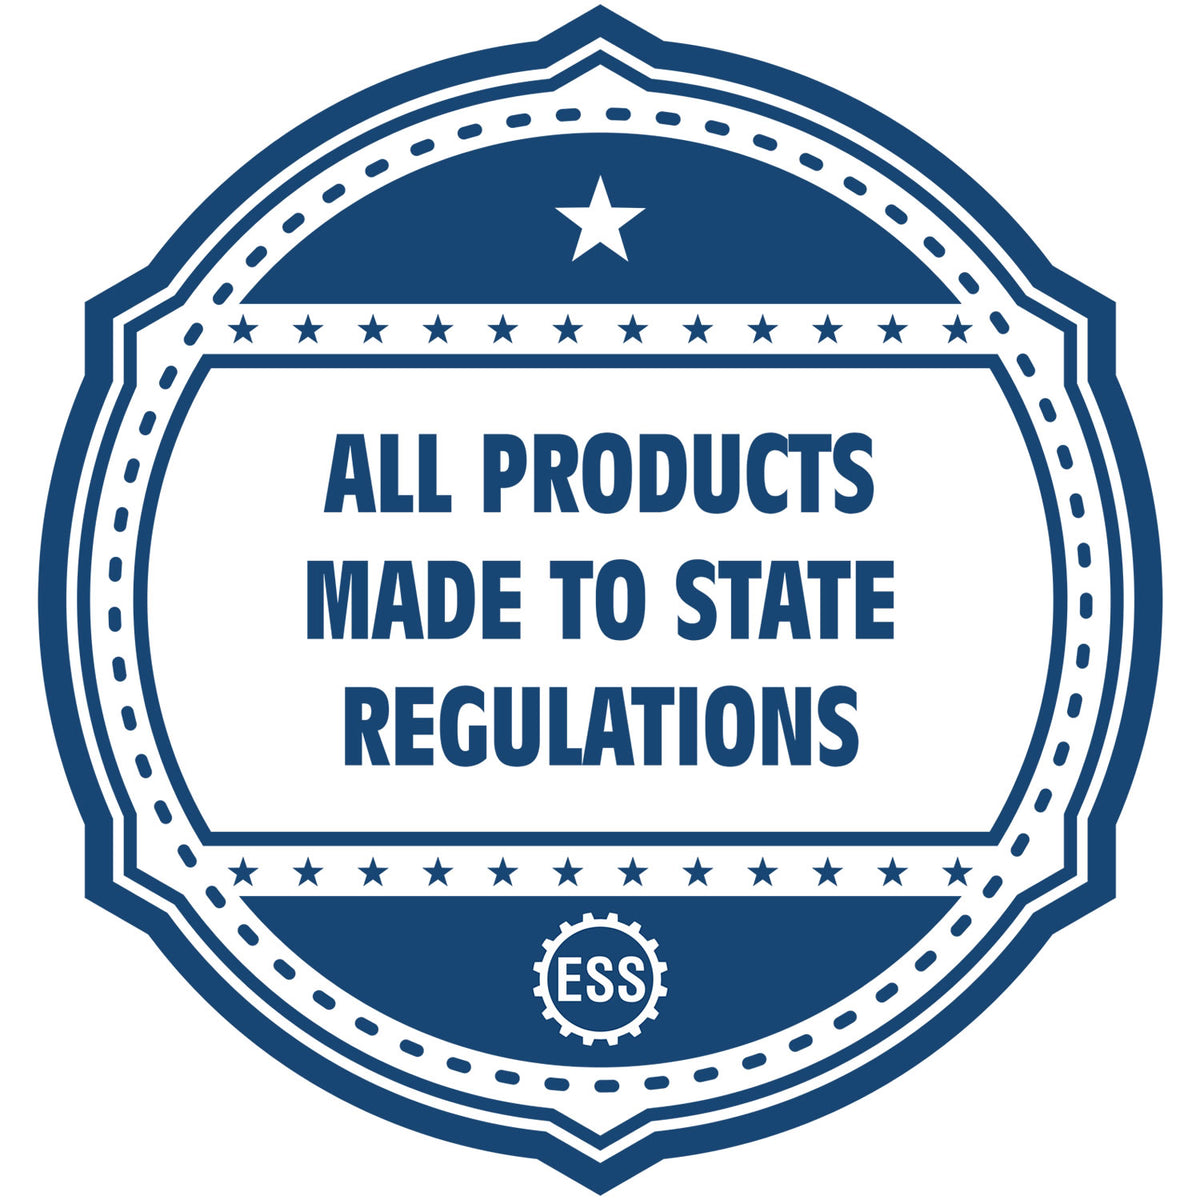 An icon or badge element for the State of North Carolina Soft Land Surveyor Embossing Seal showing that this product is made in compliance with state regulations.